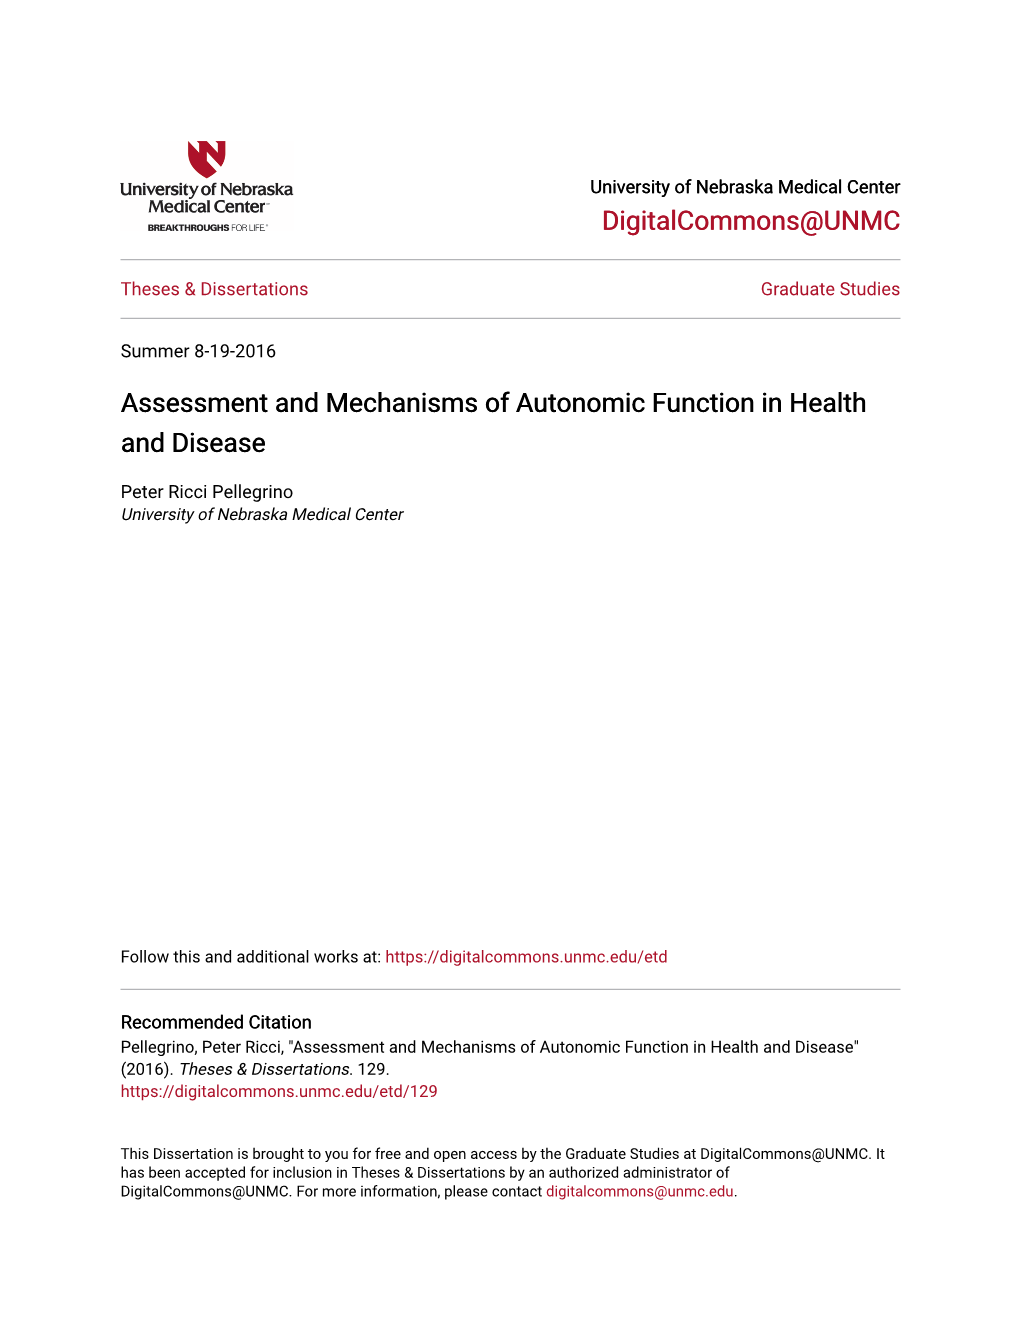 Assessment and Mechanisms of Autonomic Function in Health and Disease